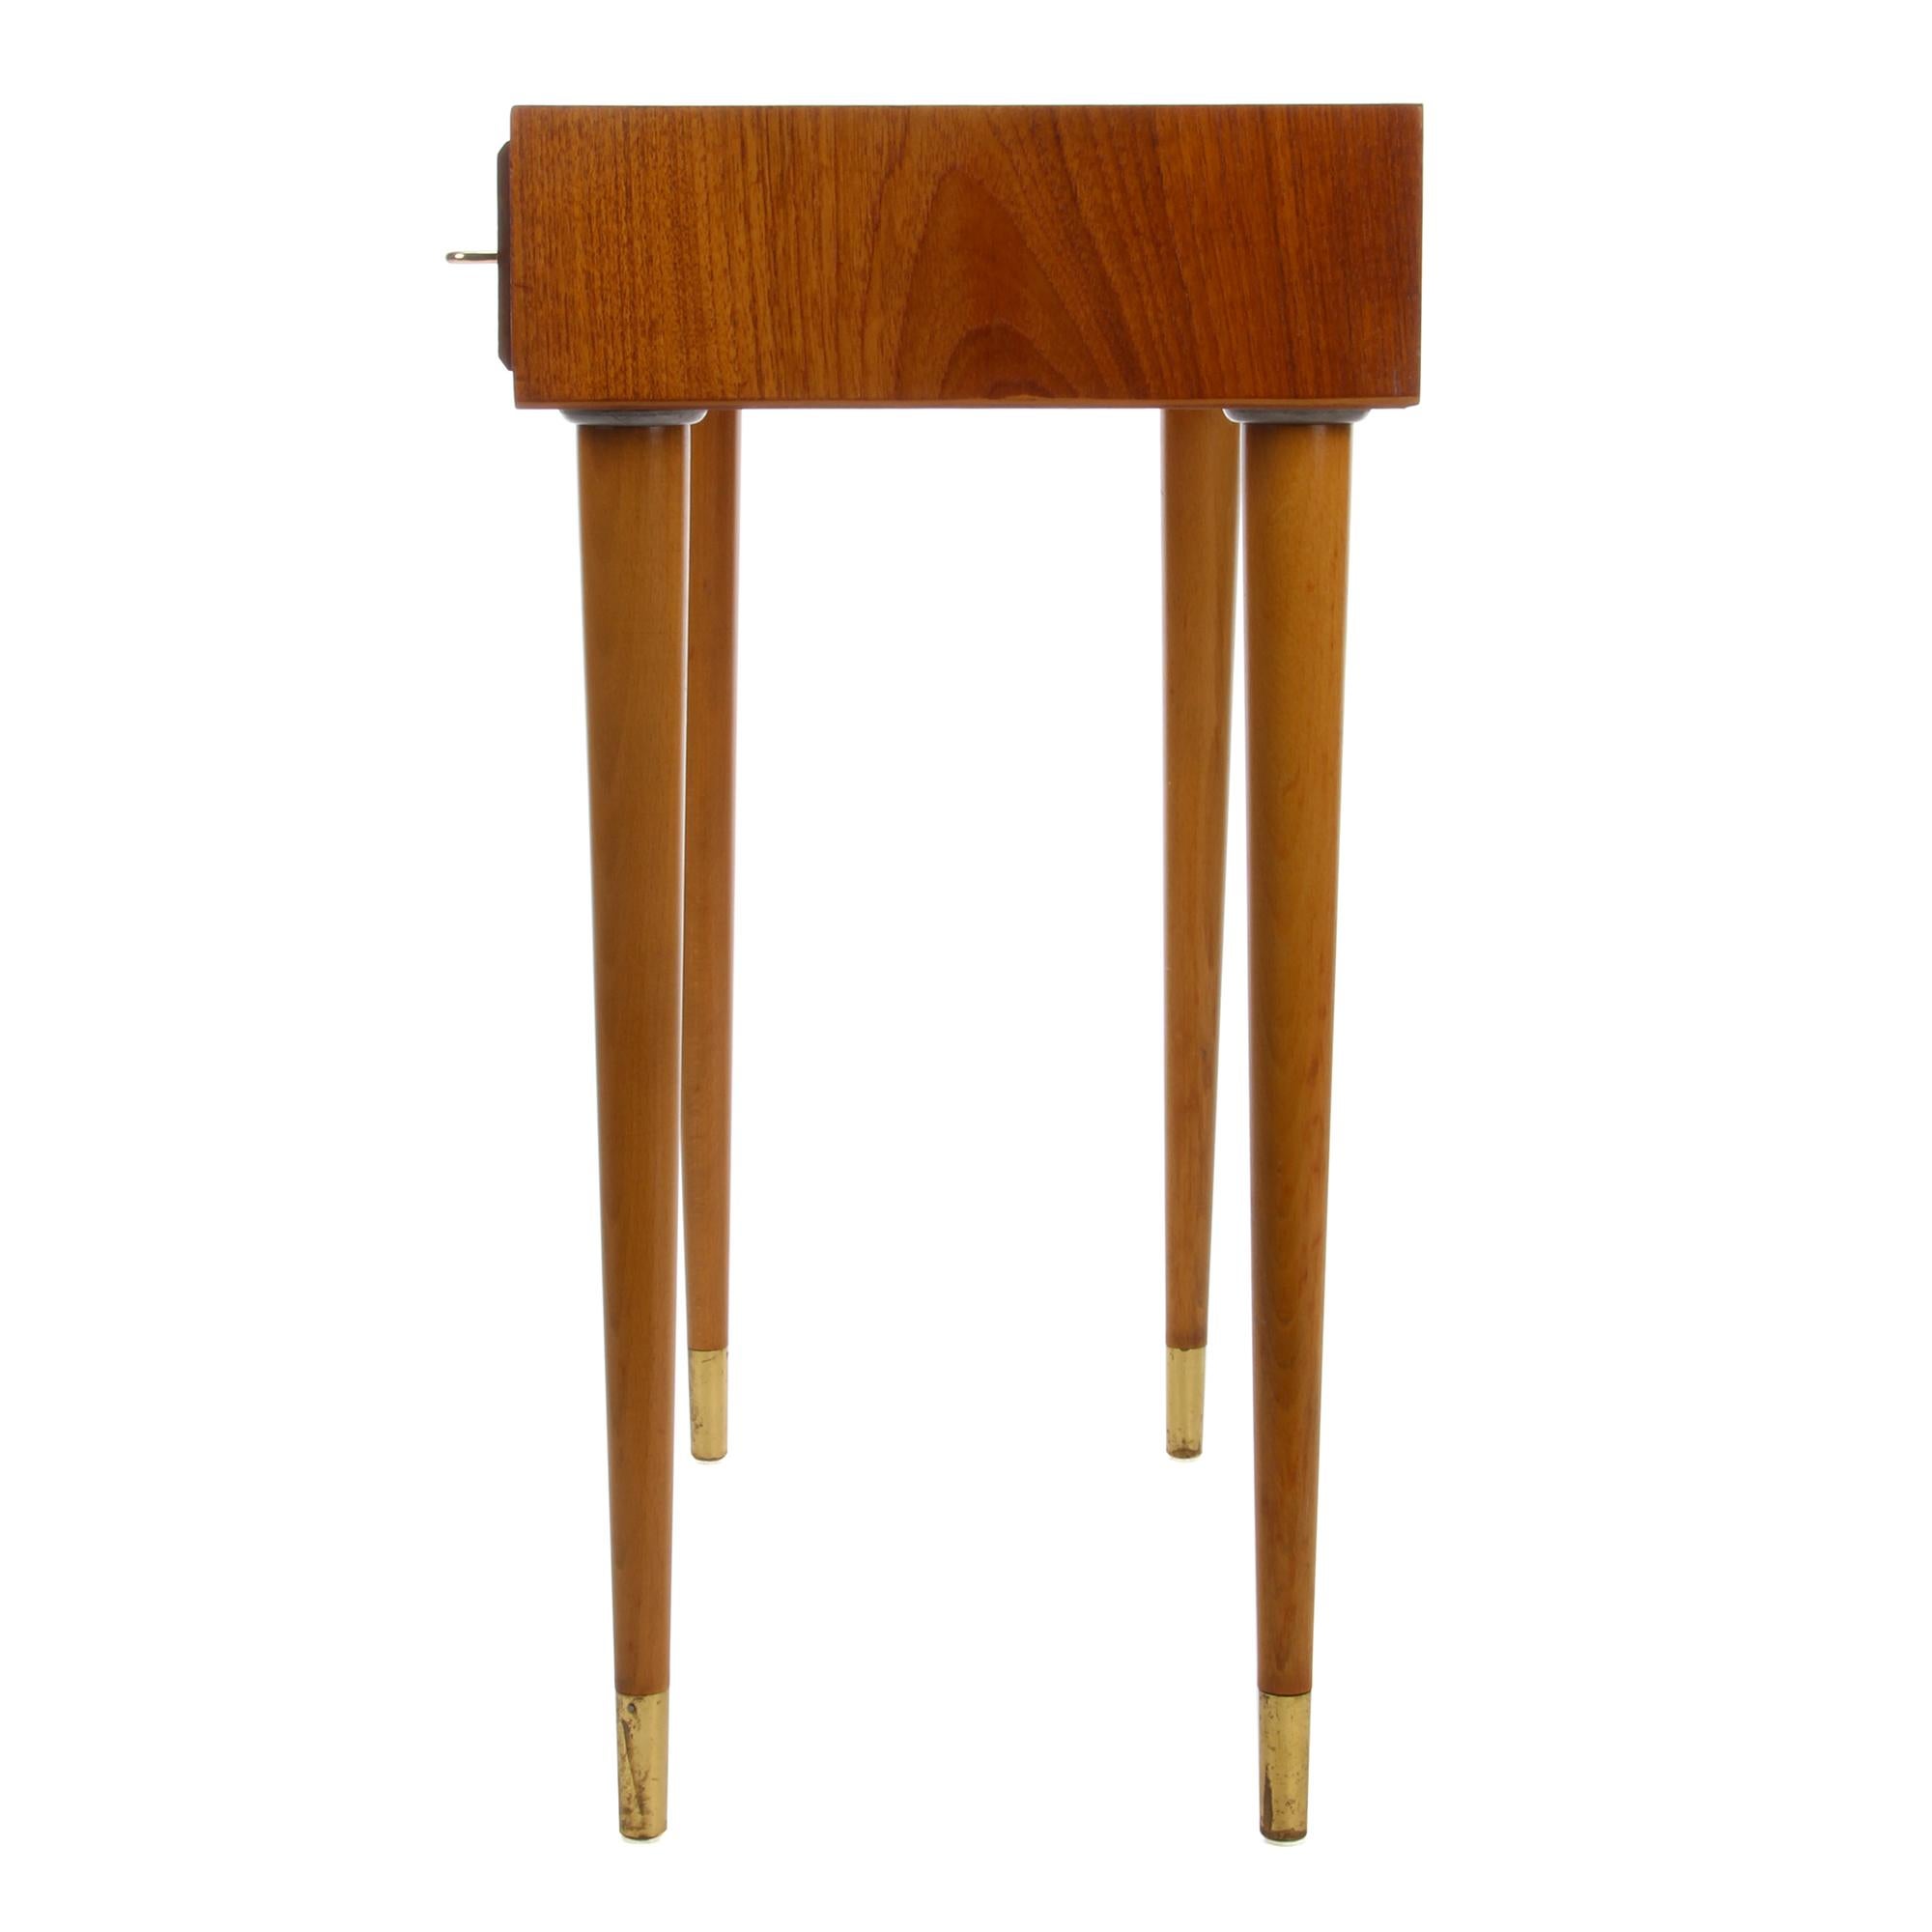 Mid-20th Century Teak Entry Table, 1960s Danish Console Table or Side Table with Two Drawers